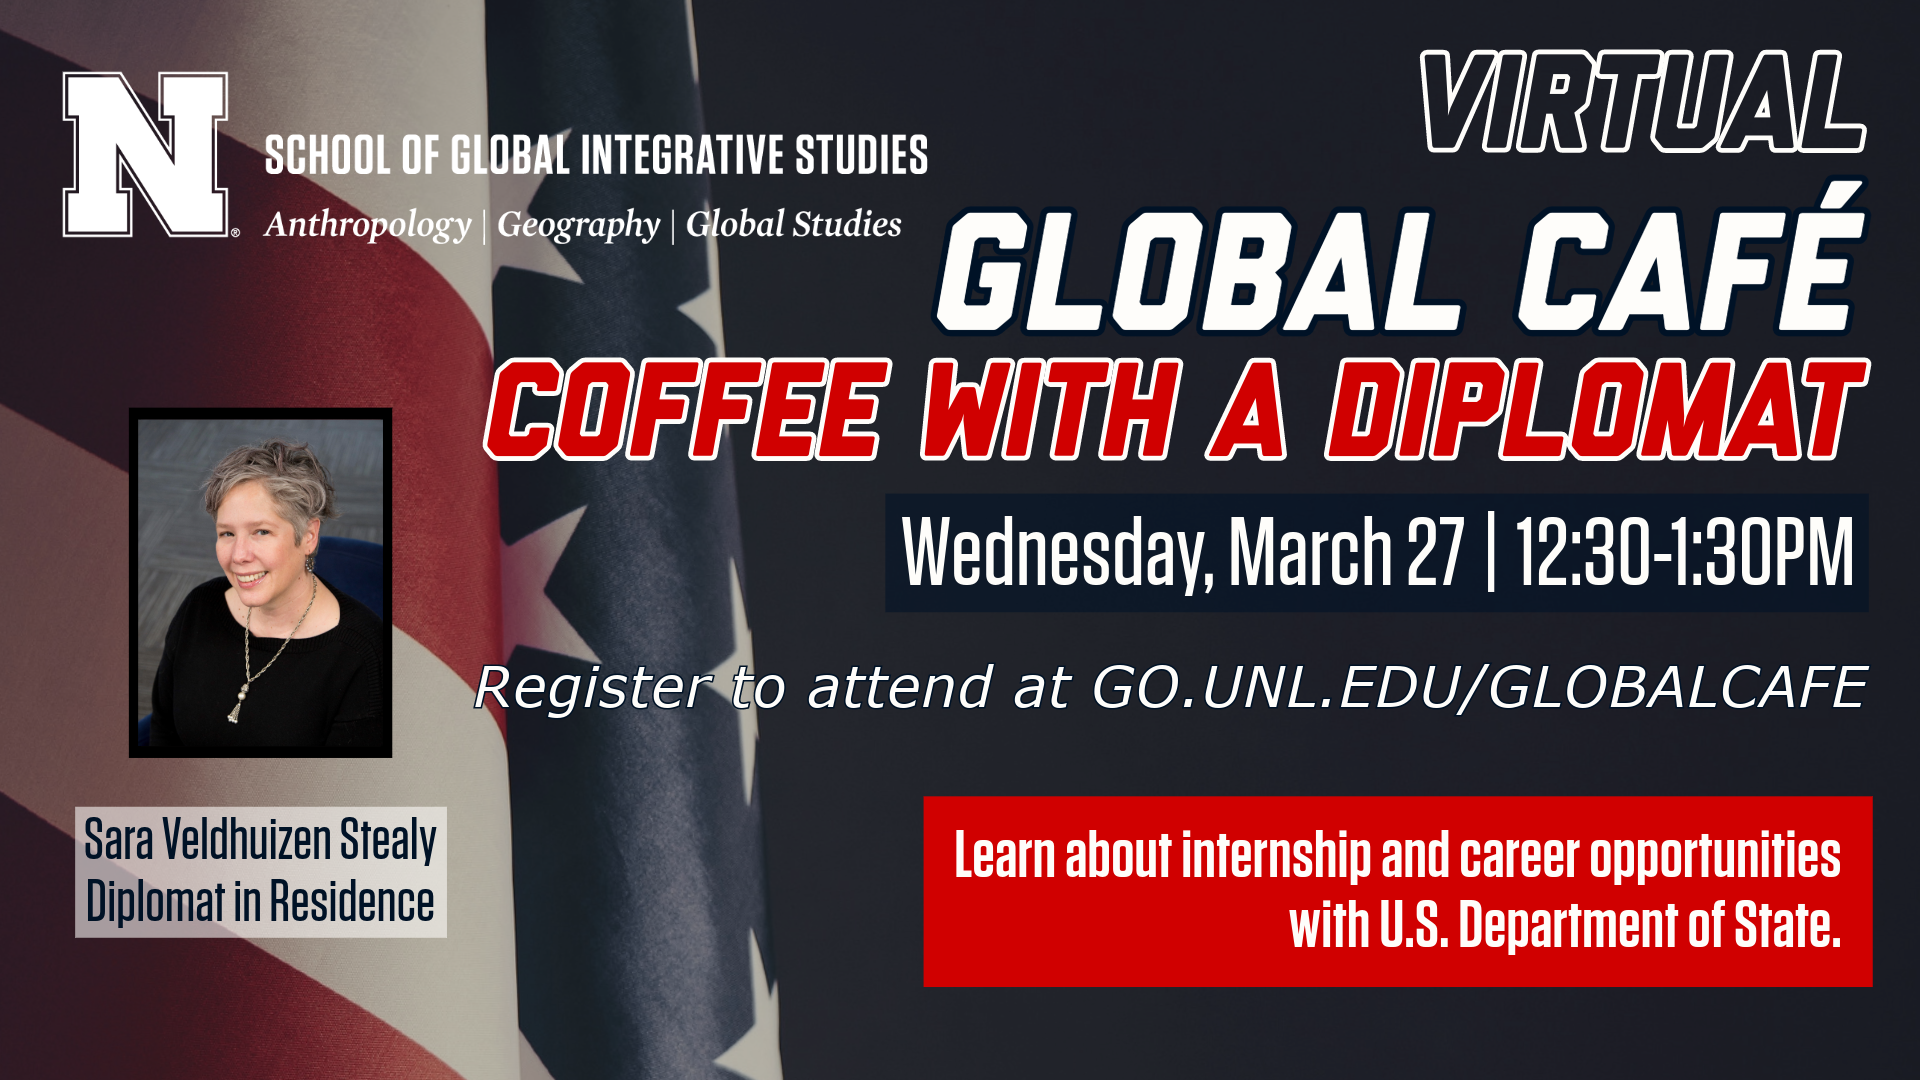 Virtual Global Cafe: Coffee with a Diplomat